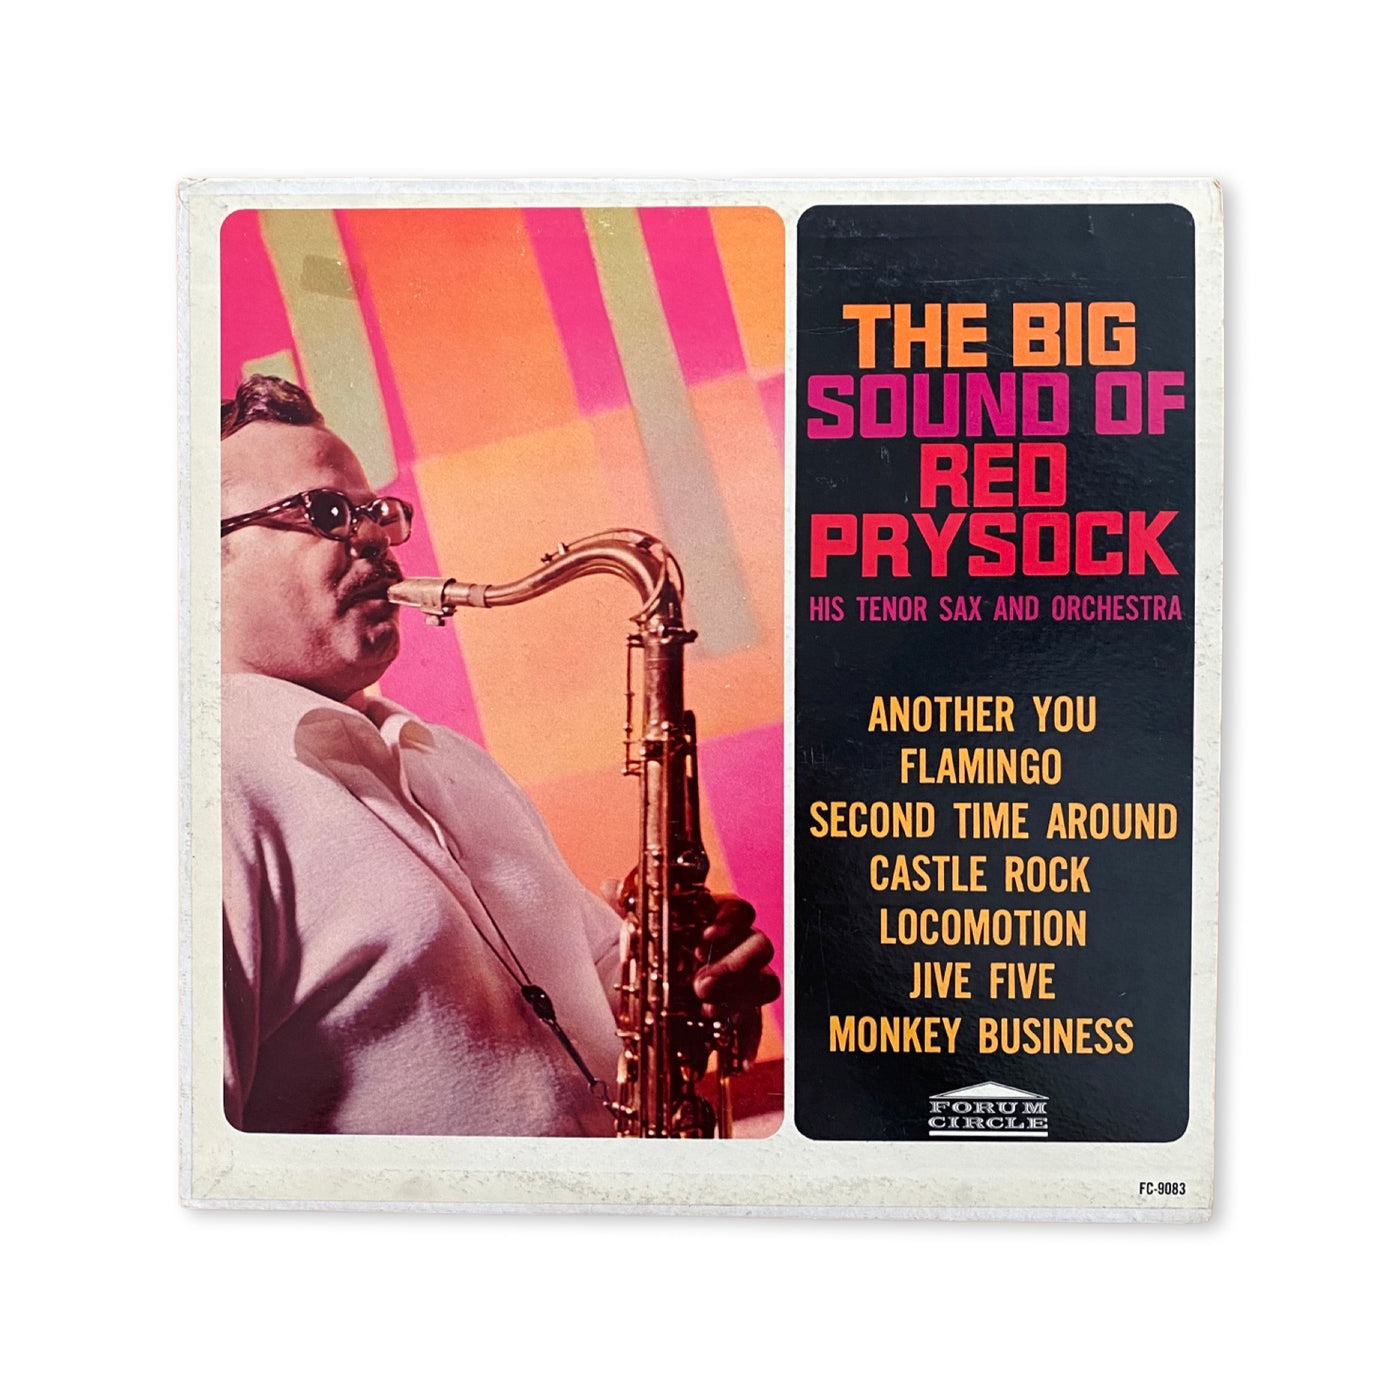 Red Prysock - The Big Sound Of Red Prysock